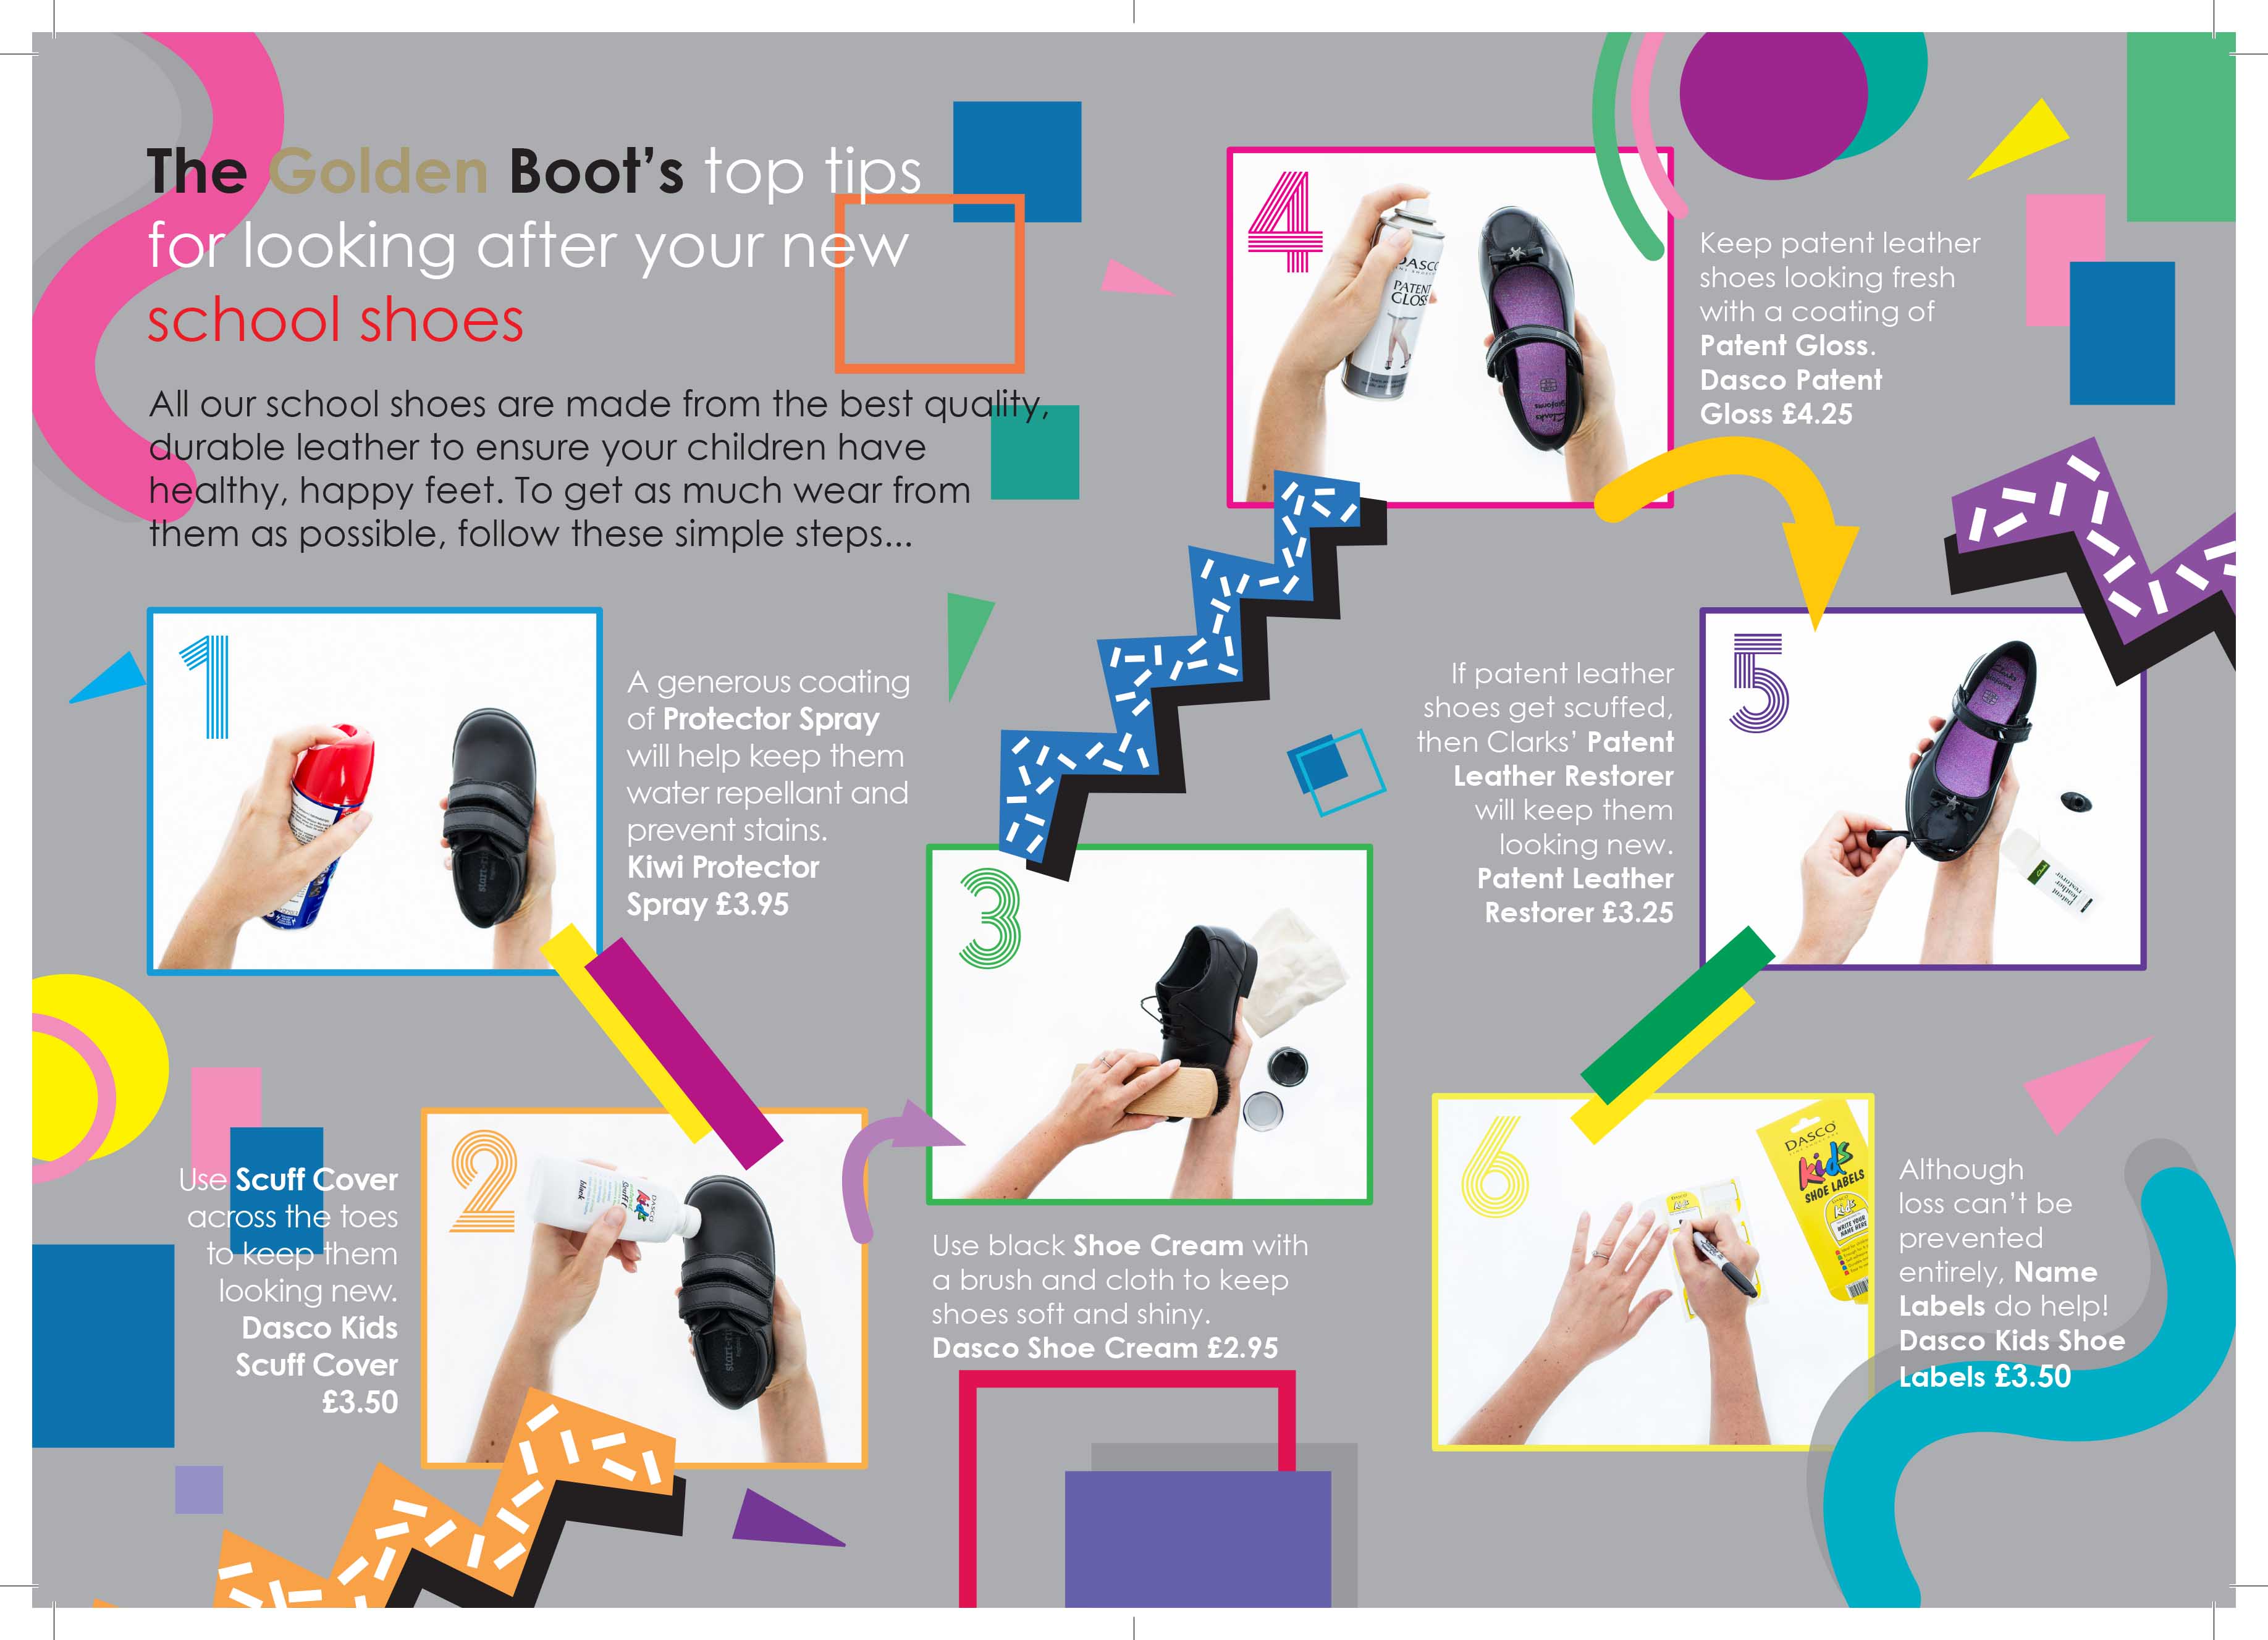 Top tips for looking after school shoes